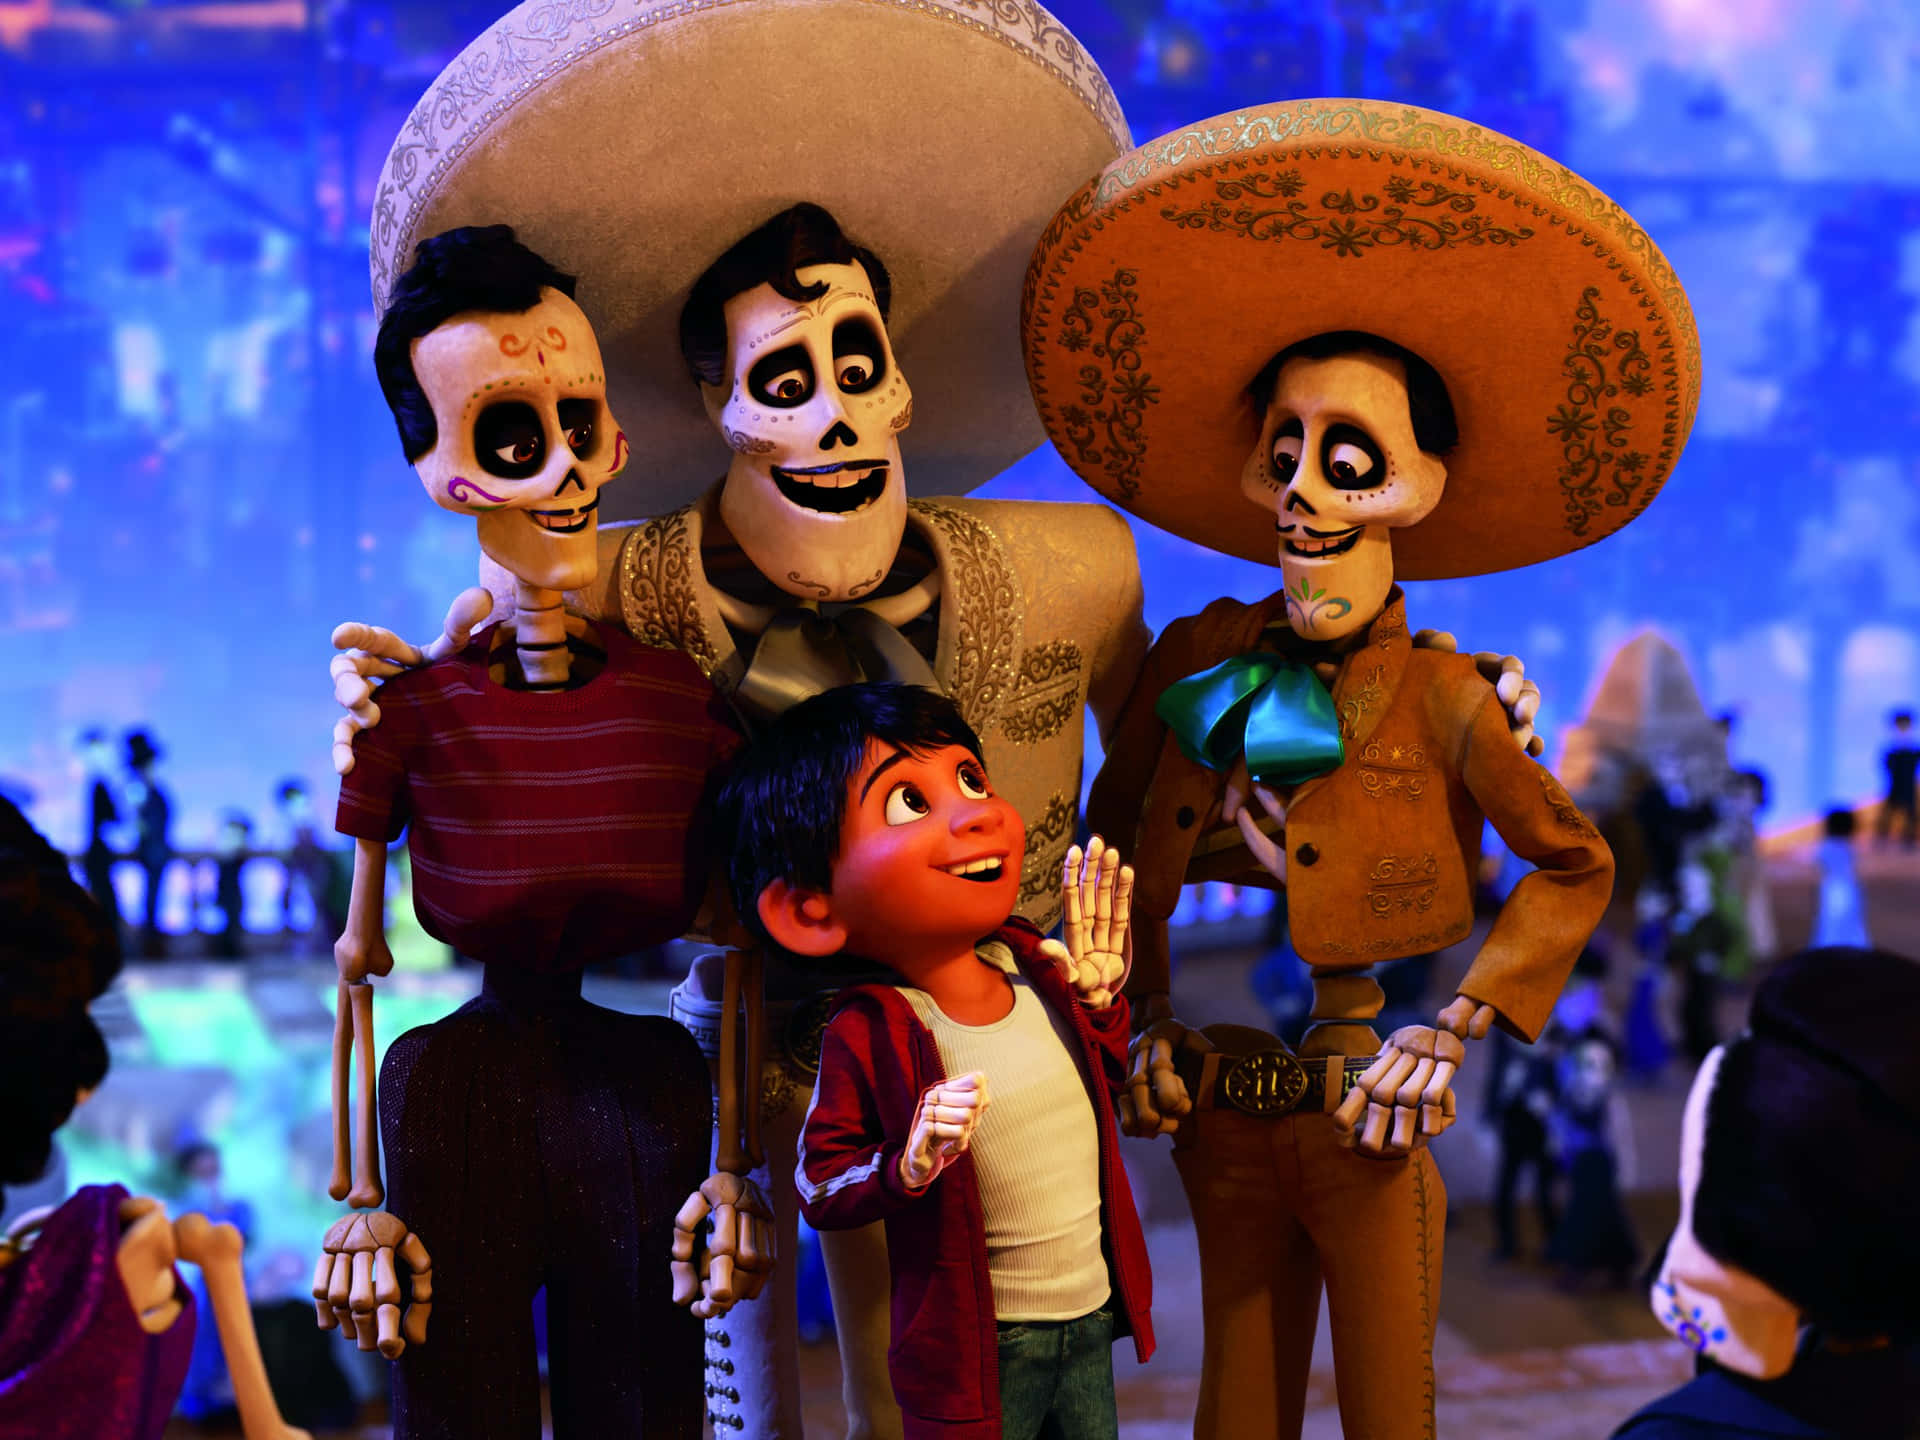 Bask in the vibrant colors of the Land of the Dead with Miguel and his musical friends in the hit movie Coca Disney! Wallpaper